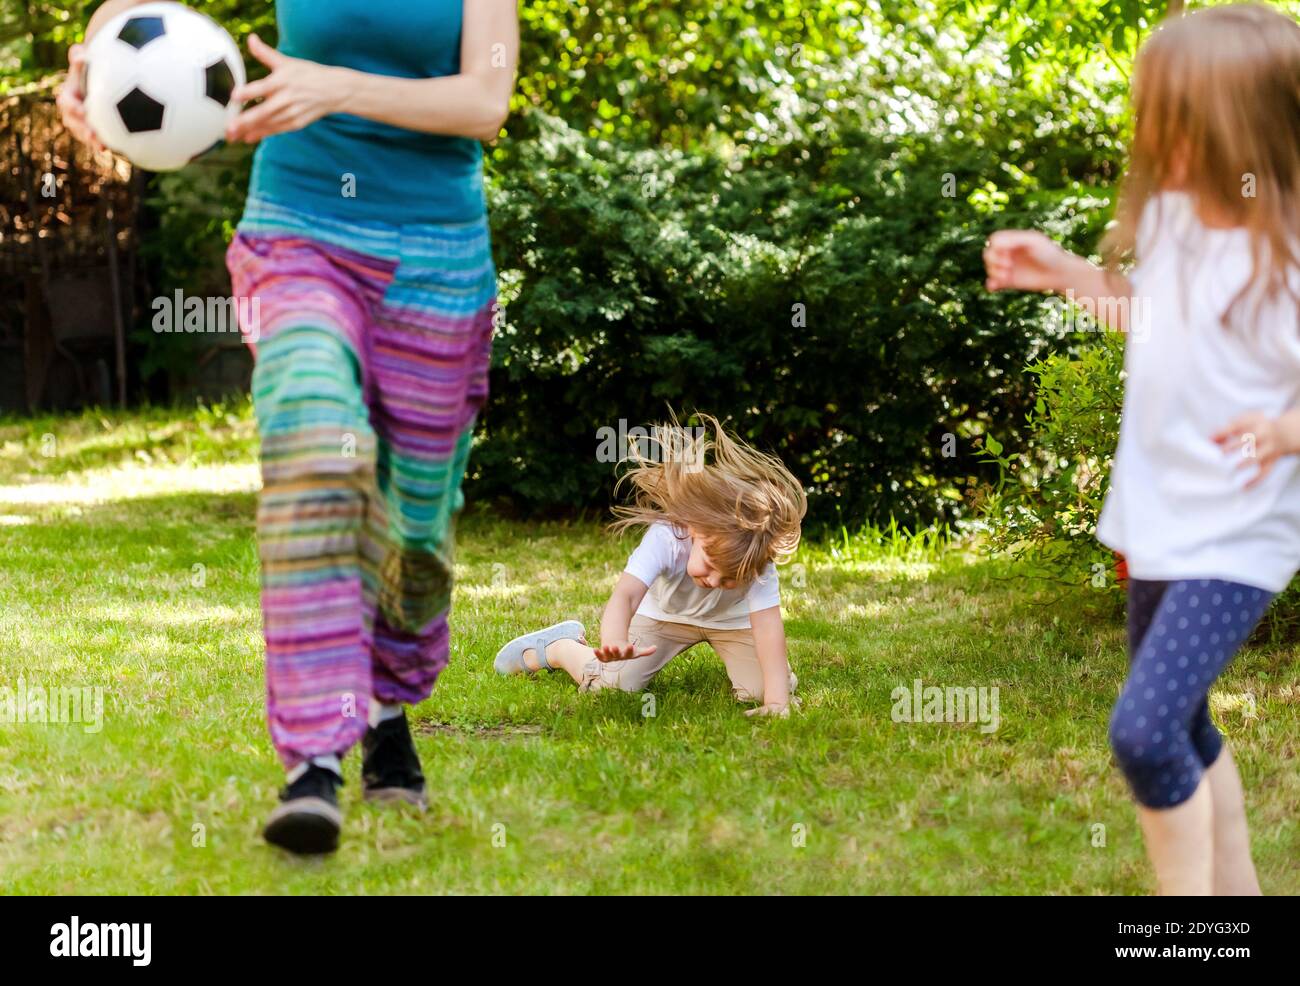 Child falling down running, playing ball with family in the garden, injury concept. Kids outdoors sport activity accident, fall on the grass Stock Photo